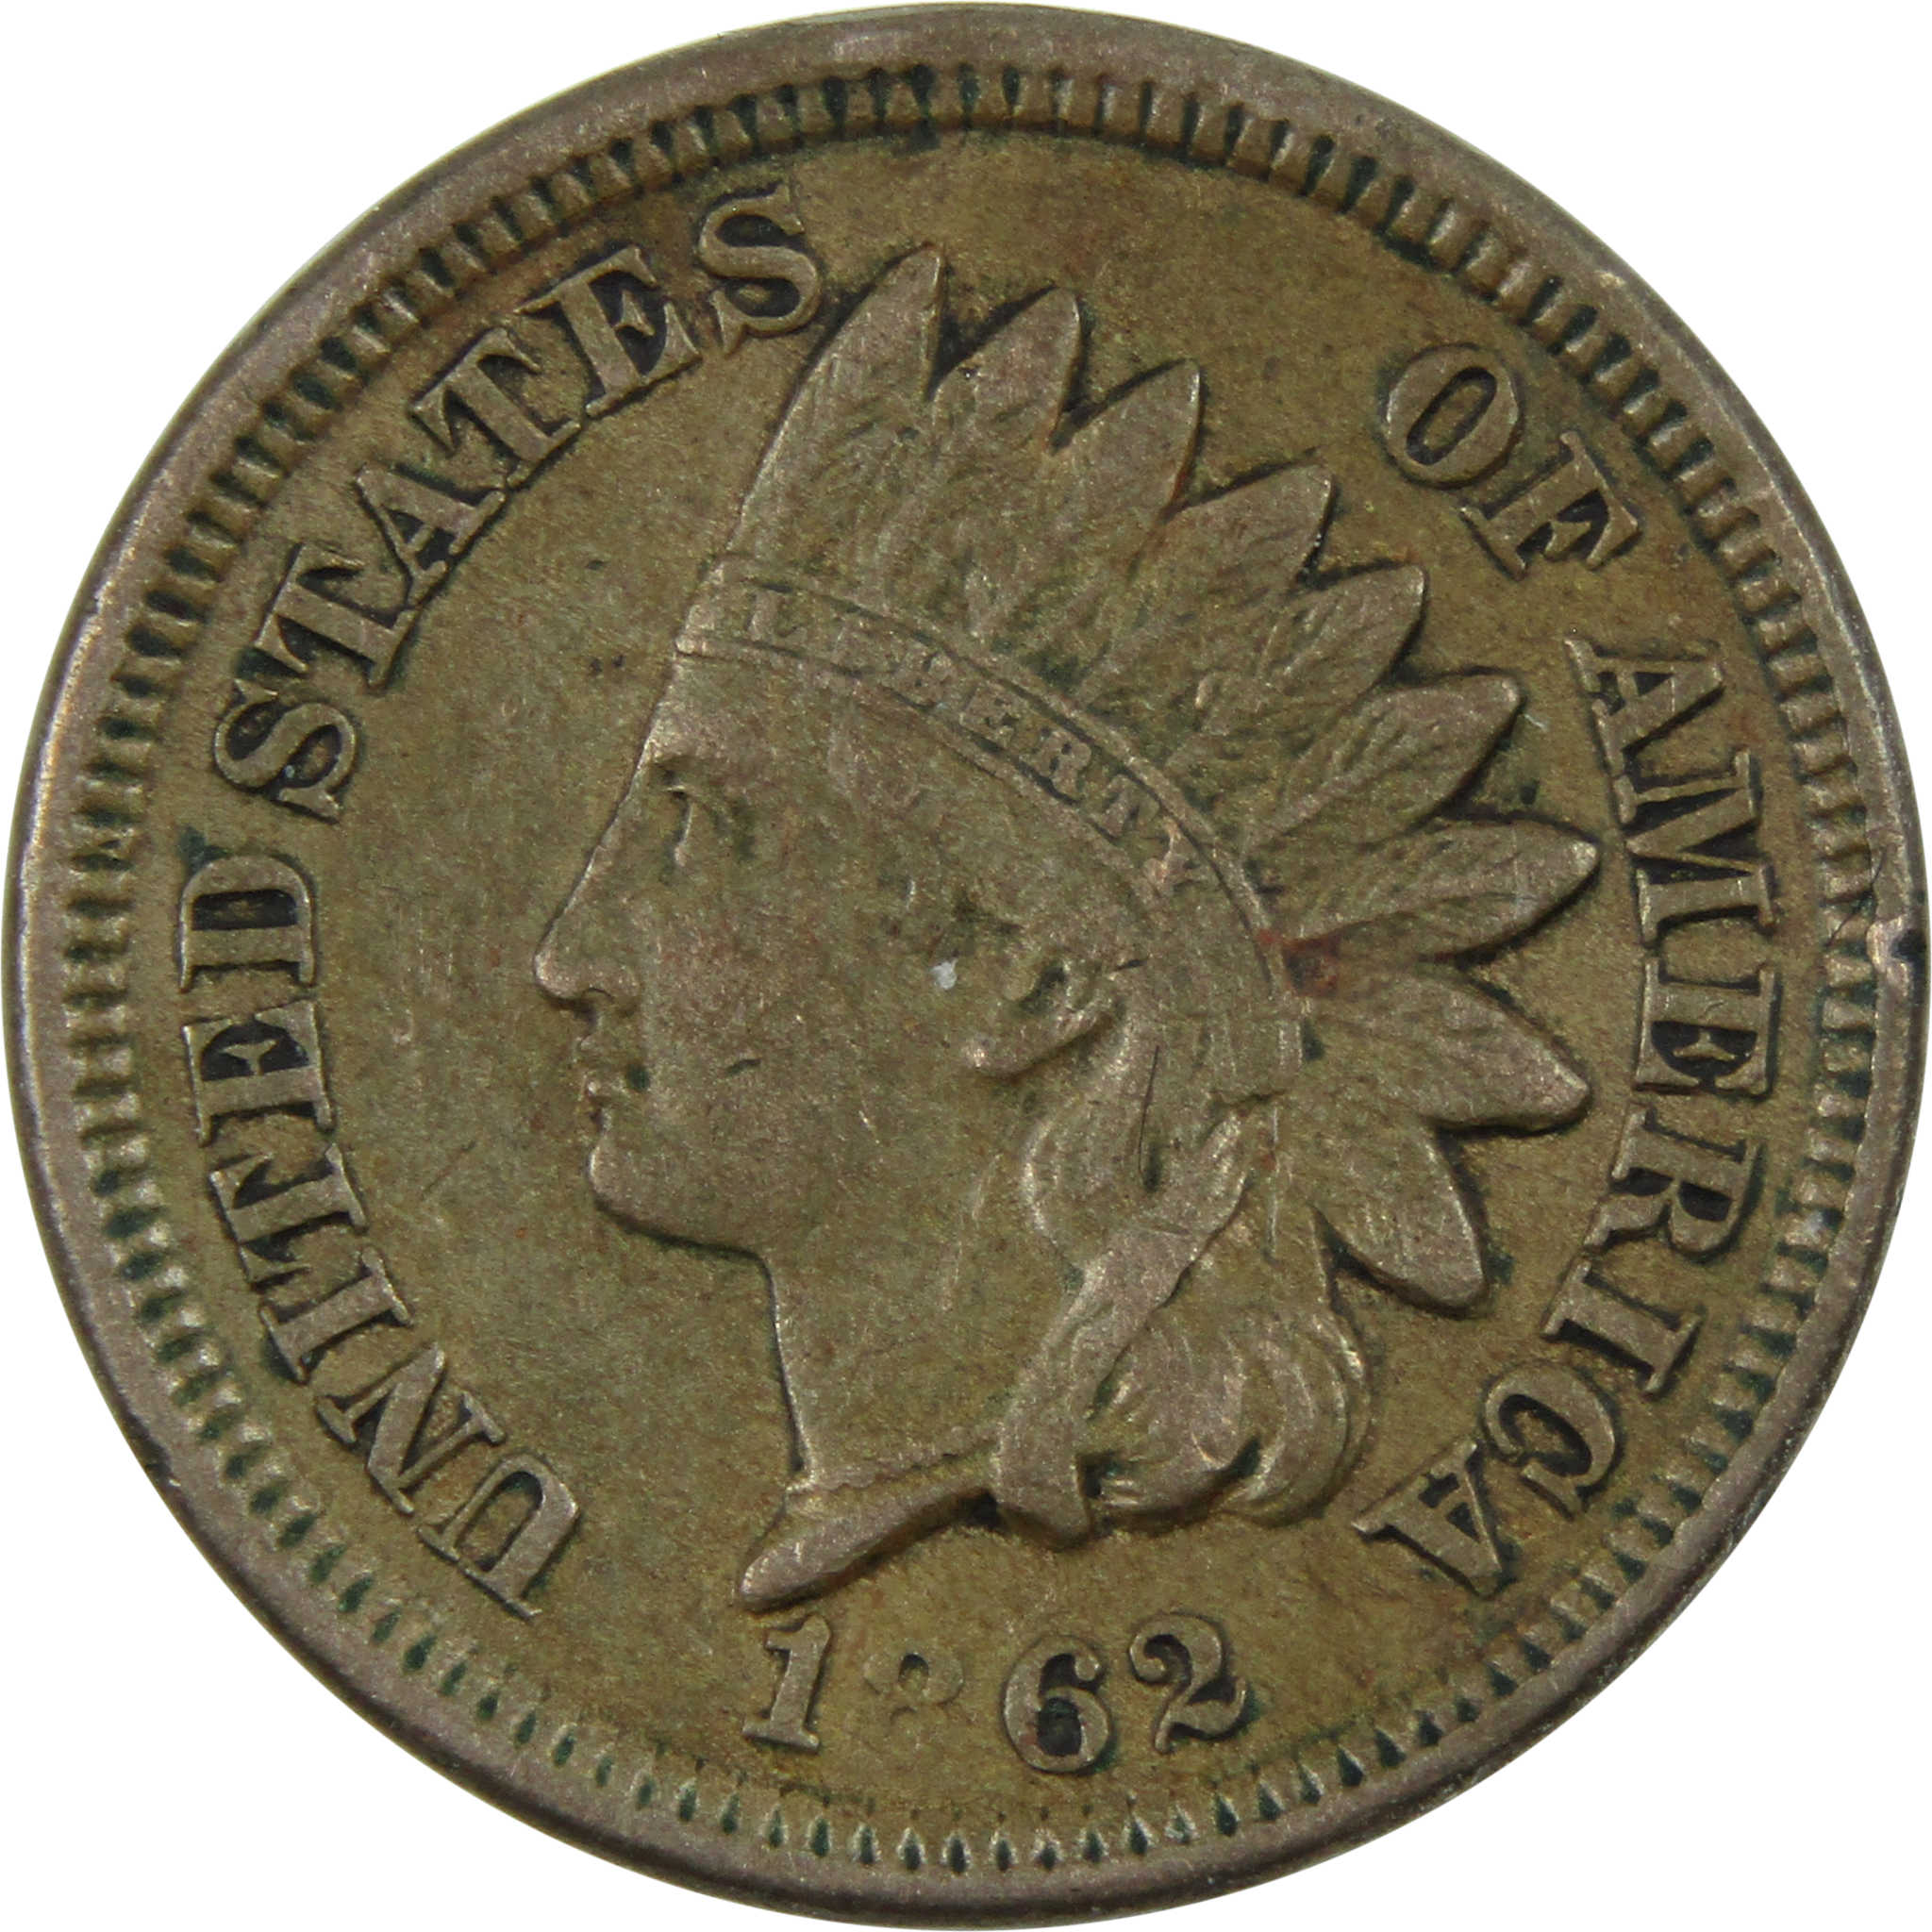 1862 Indian Head Cent XF EF Extremely Fine Copper-Nickel 1c SKU:I12438